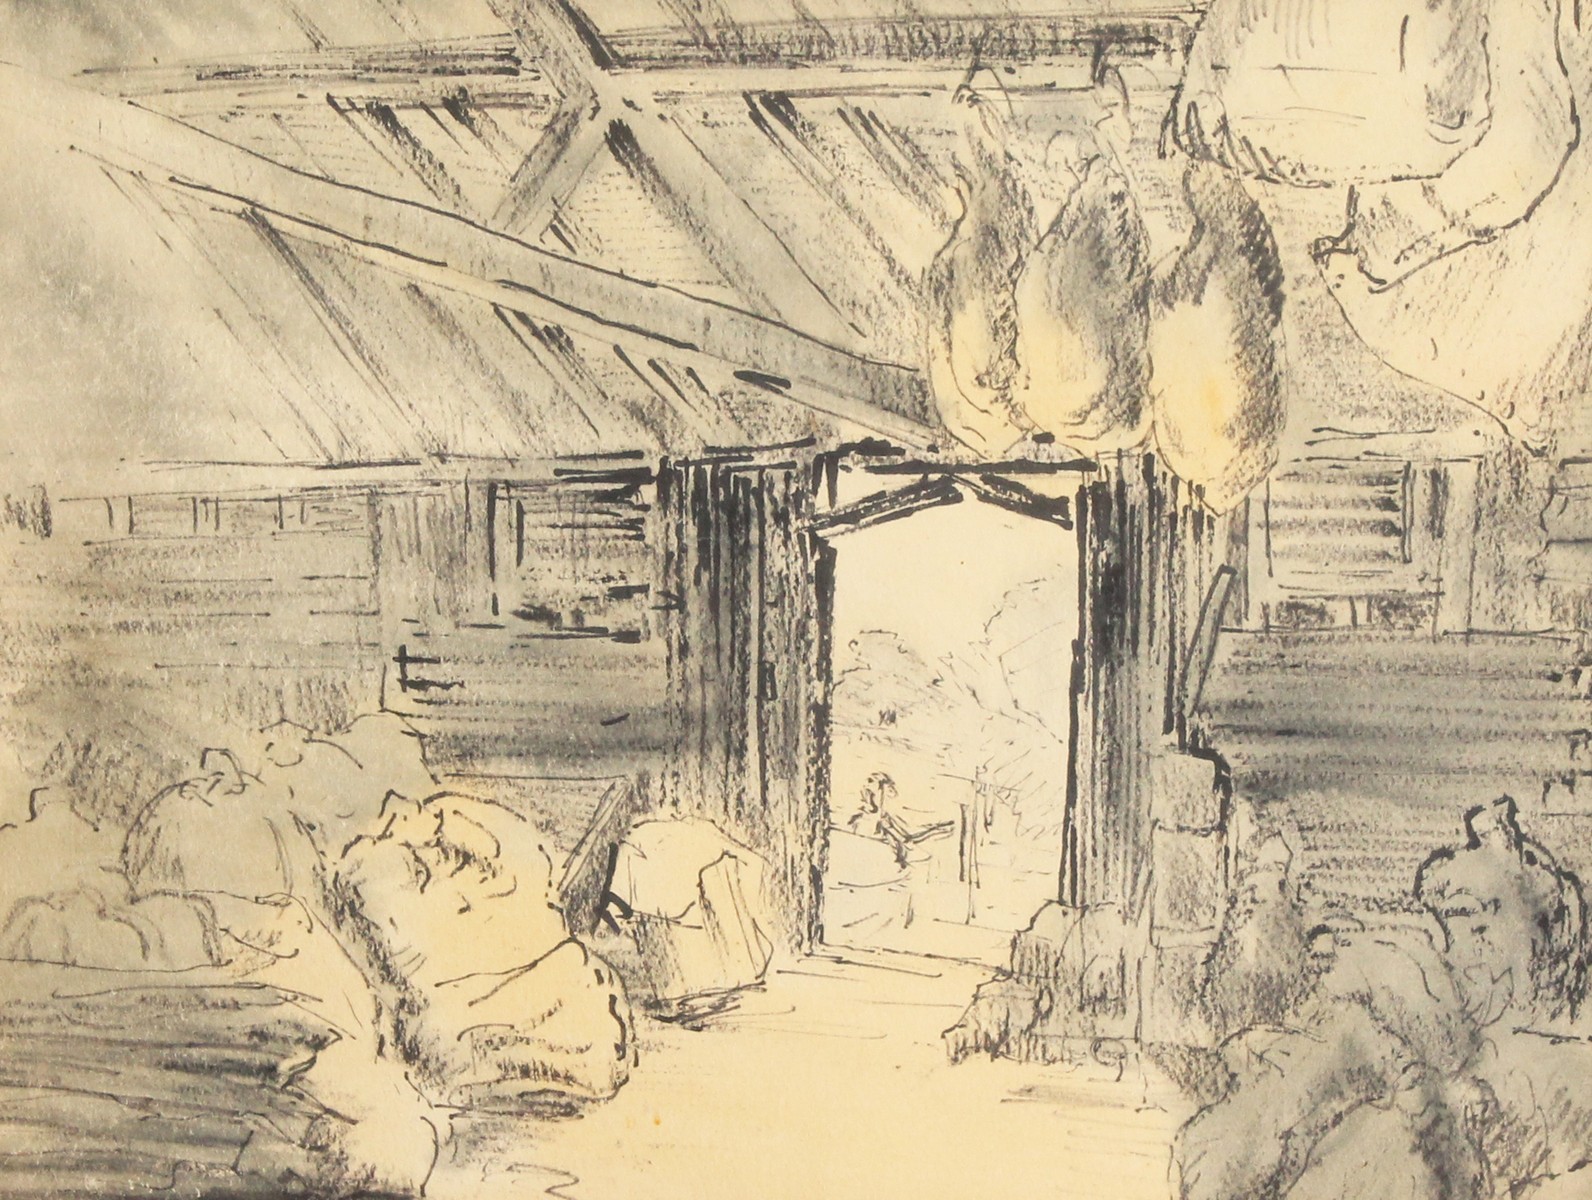 Barbara Doyle. 'Sussex Barn', Scene of a Barn Interior, Ink and Wash. 11" x 14". Provenance: